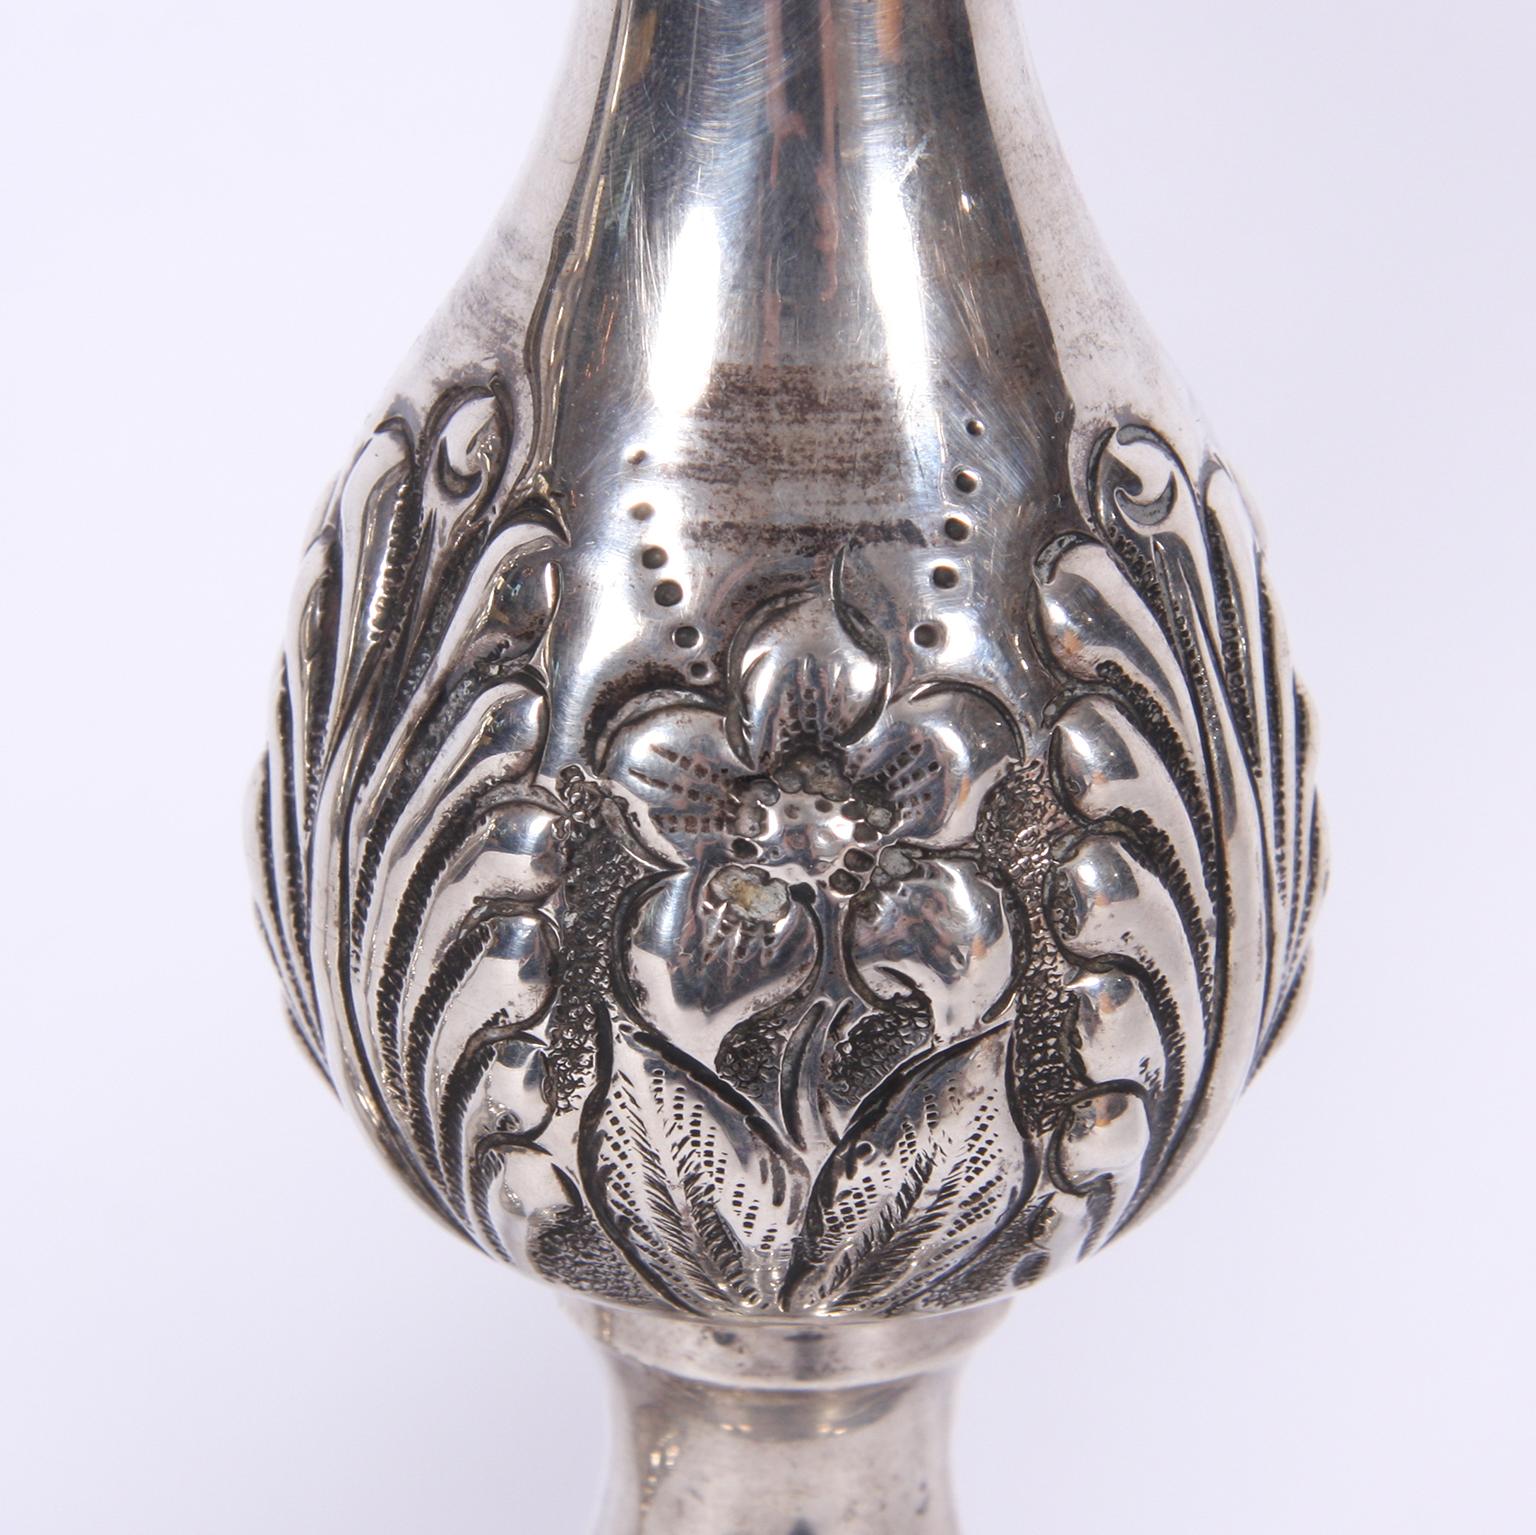 English, early 20th century.

Pair of beautiful silver candlesticks with floral design.